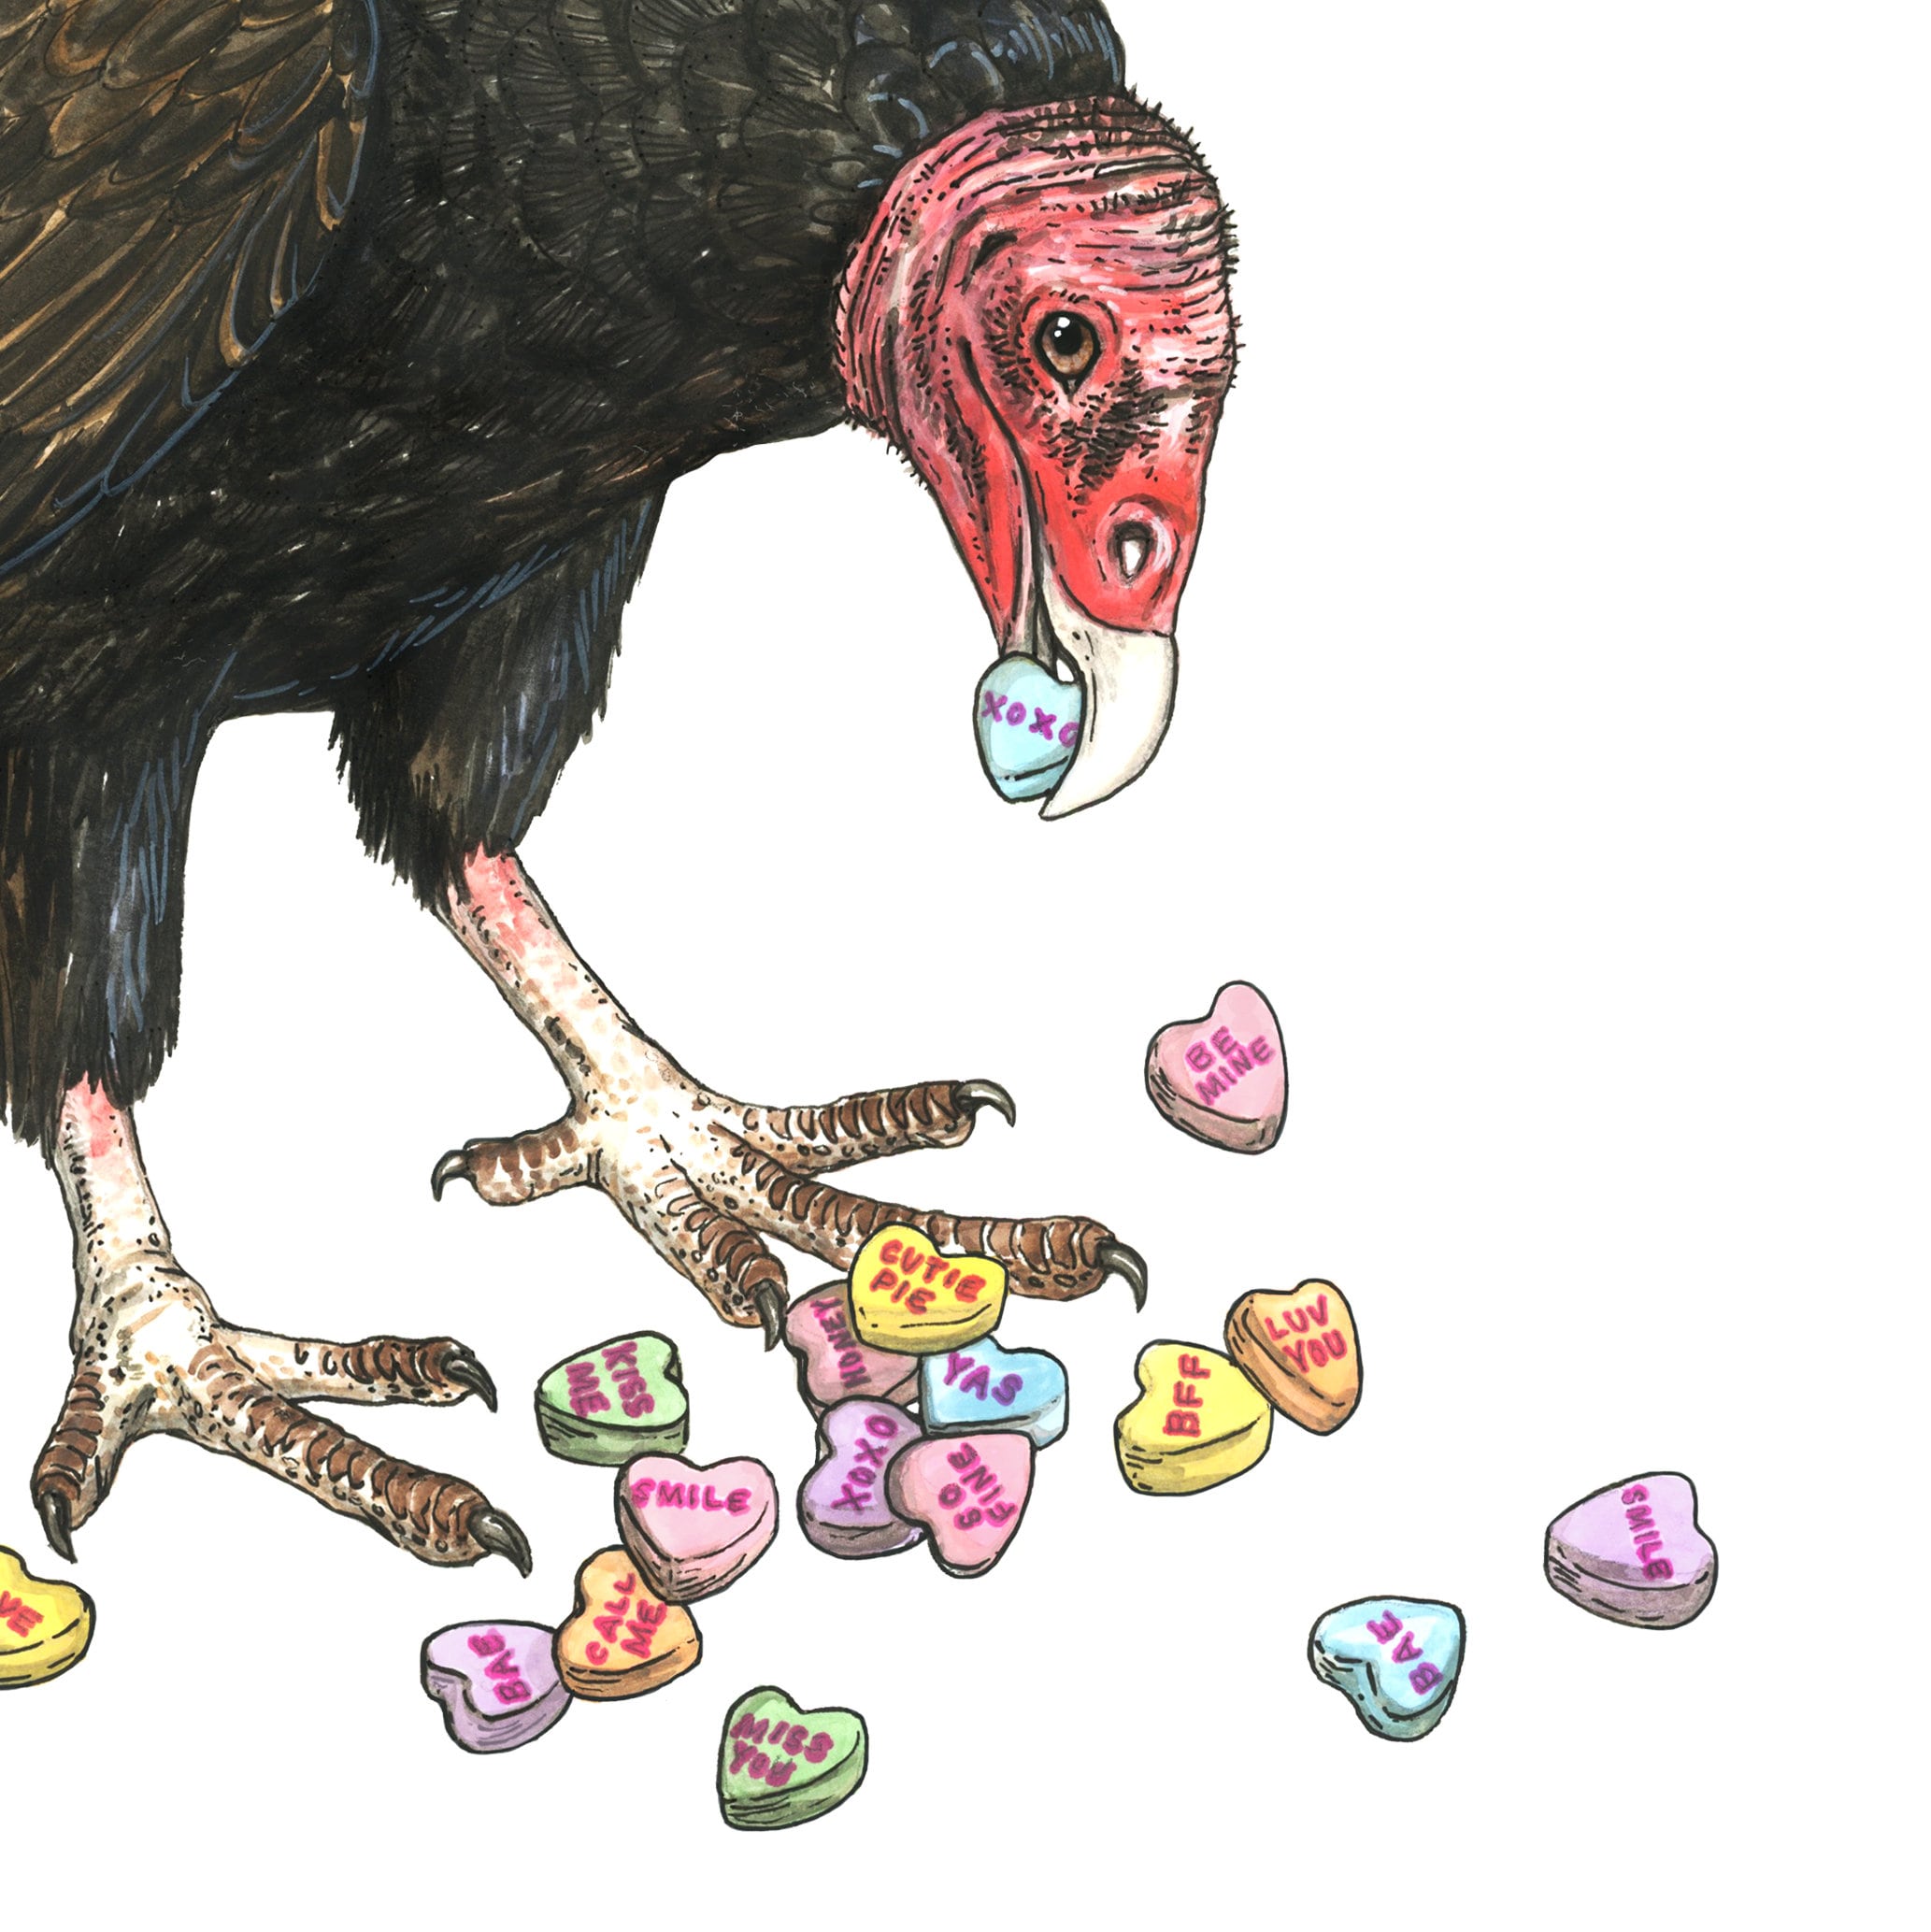 Turkey Vulture Candy Hearts Snack Attack Archival Print image